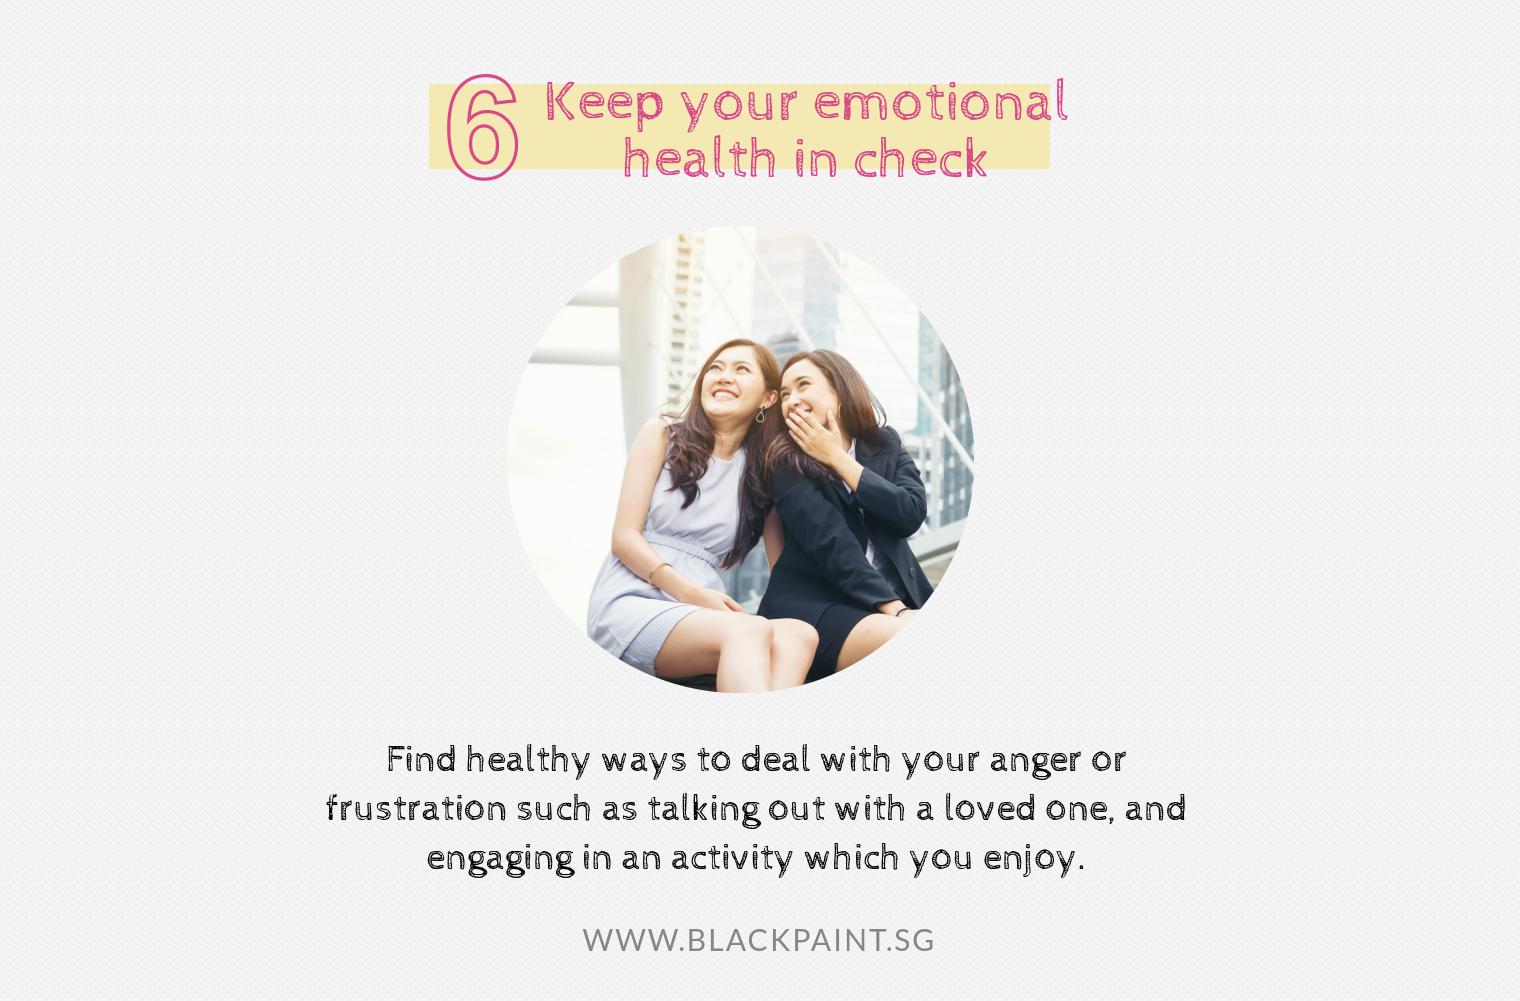 illustration of keeping your emotional health in check